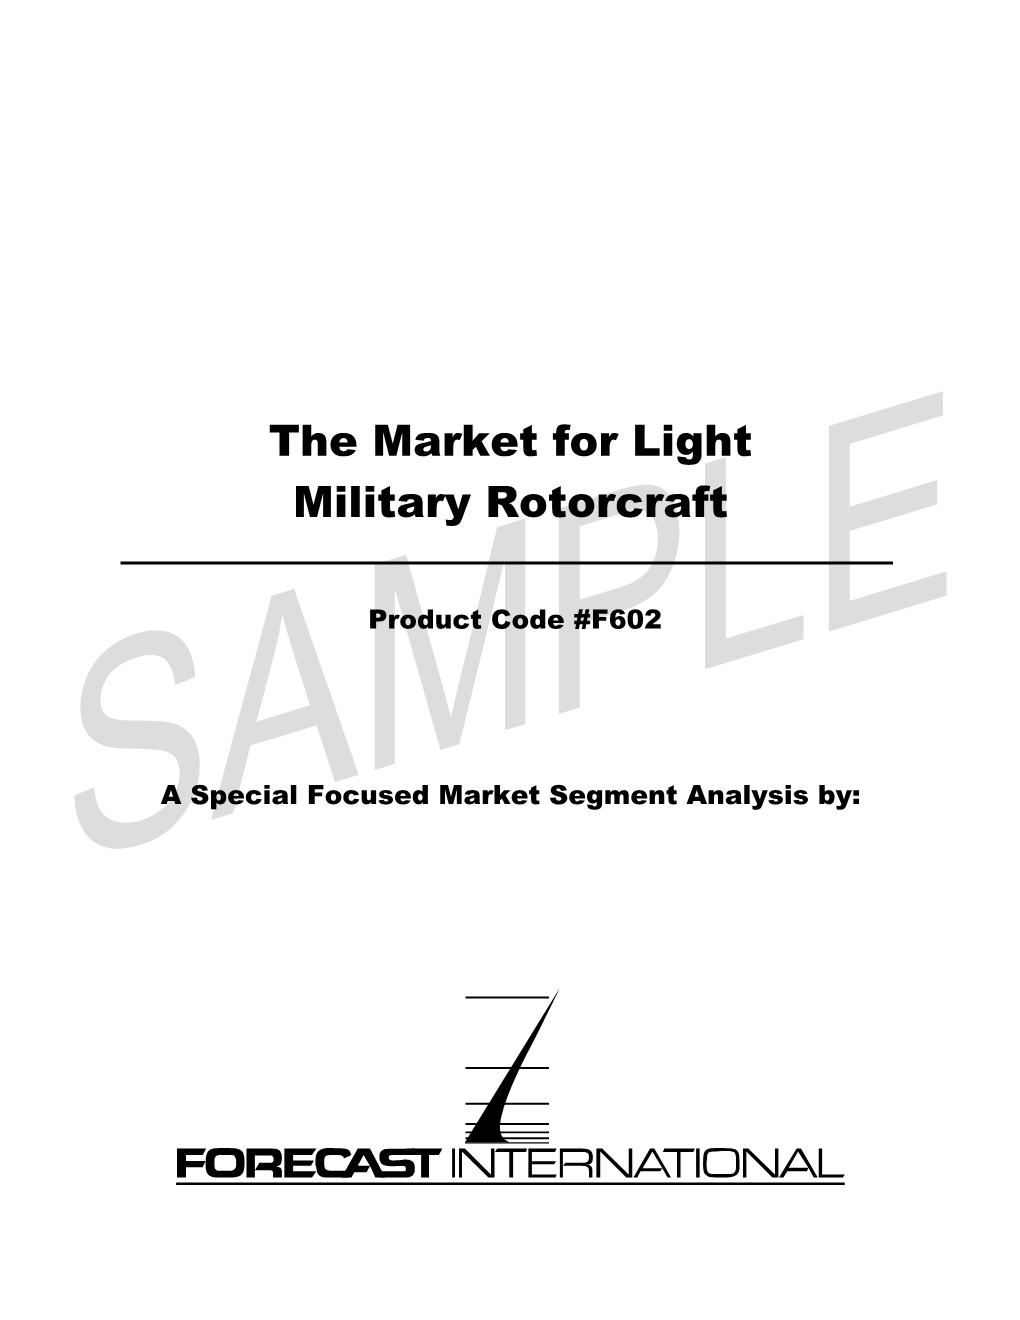 The Market for Light Military Rotorcraft